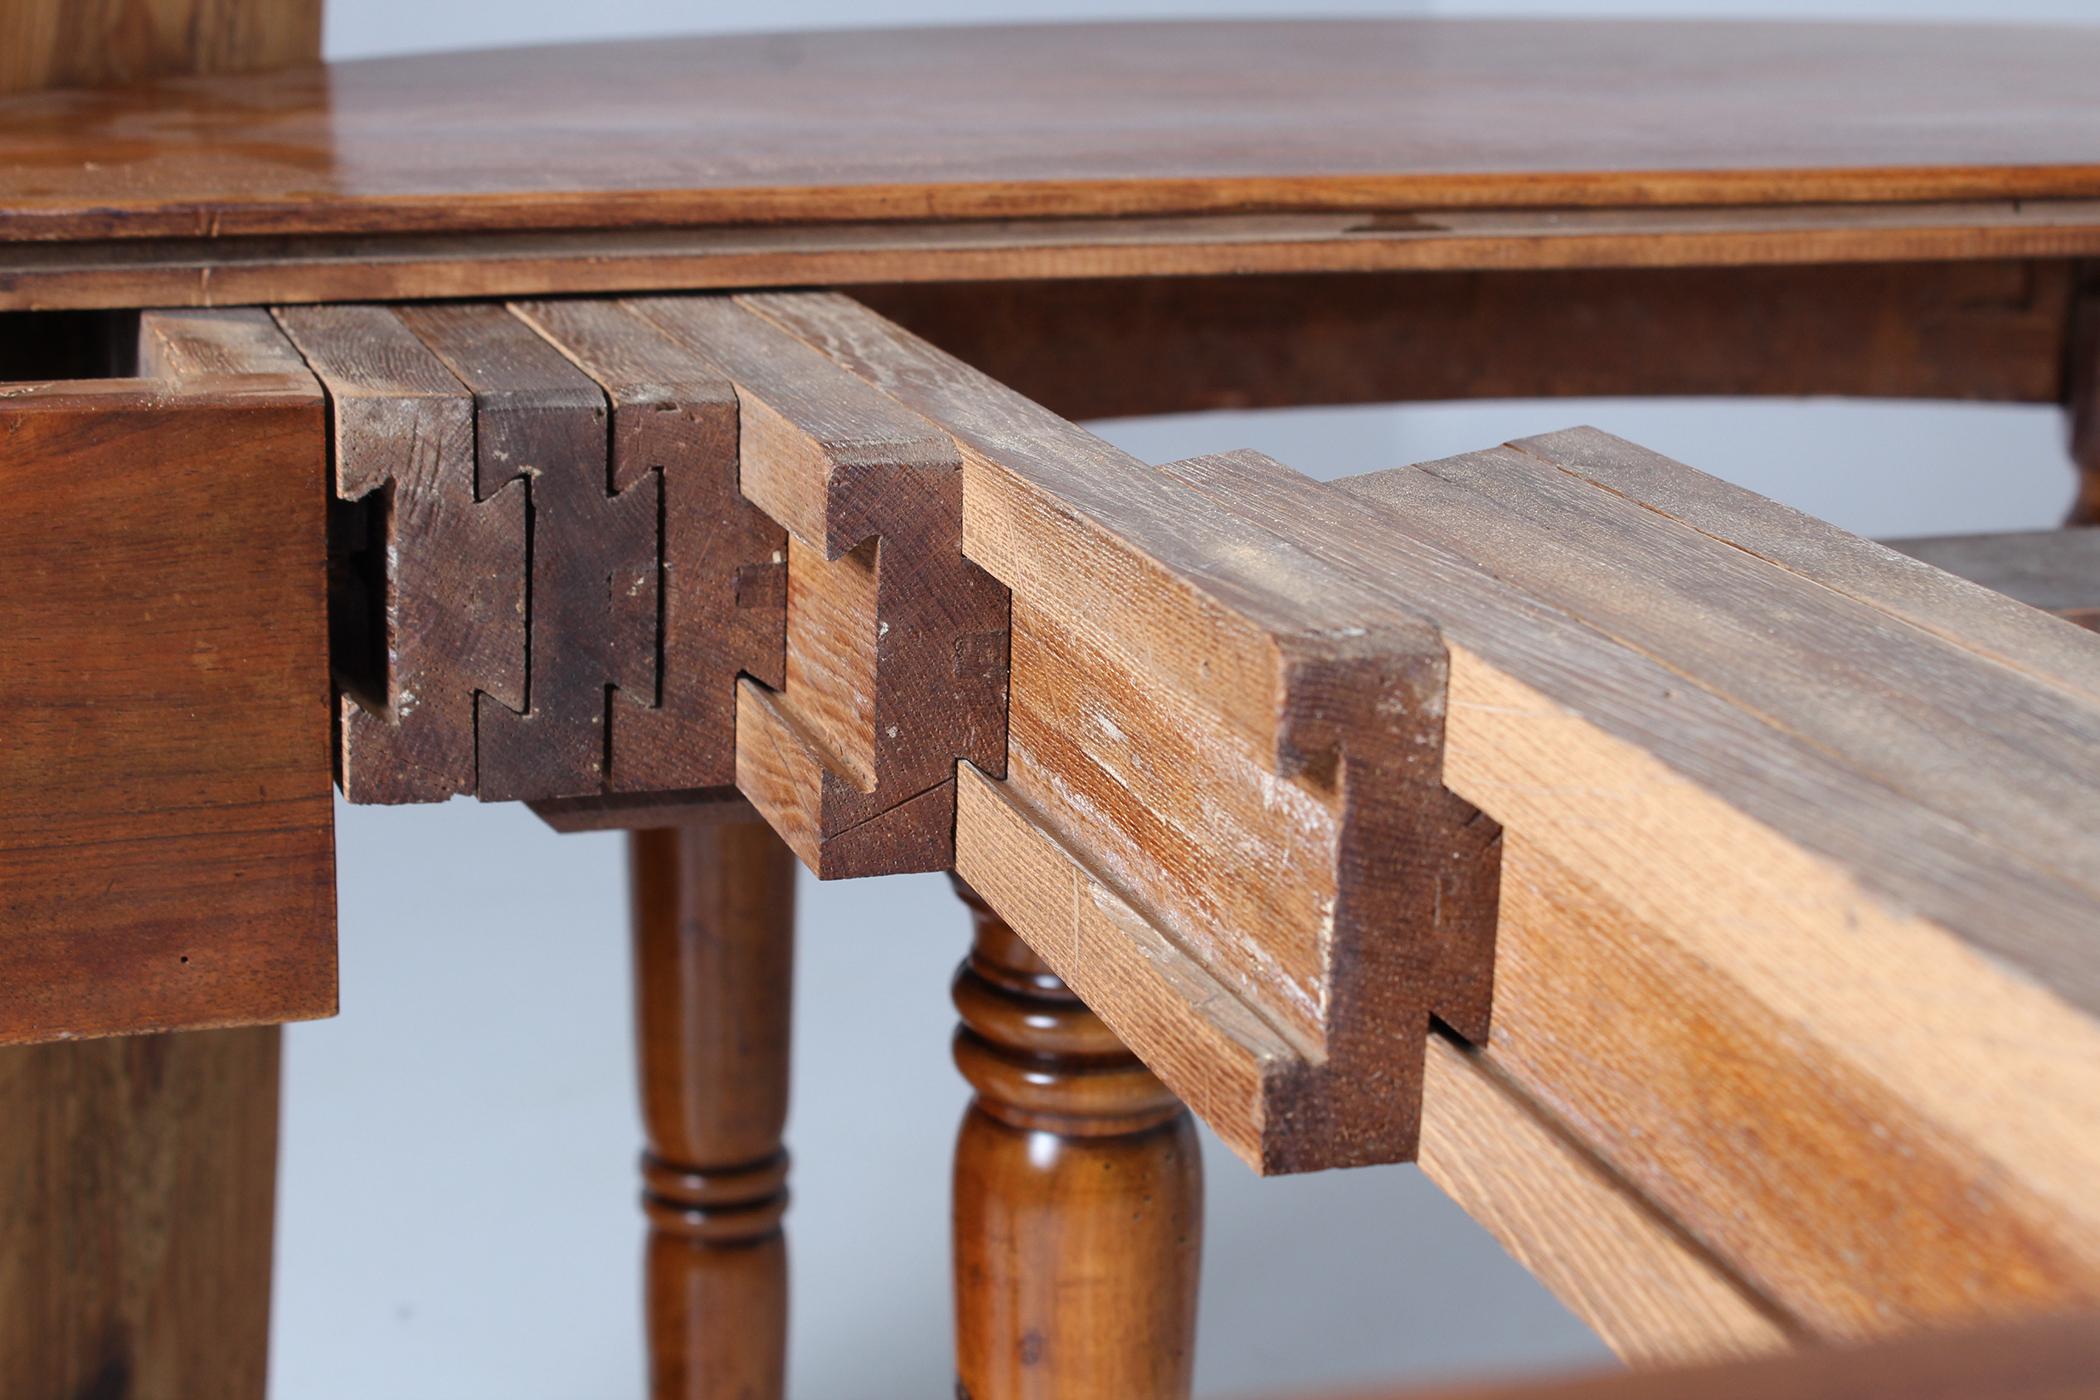 Large 19th Century Dining Table, Walnut, 12-16 People 1